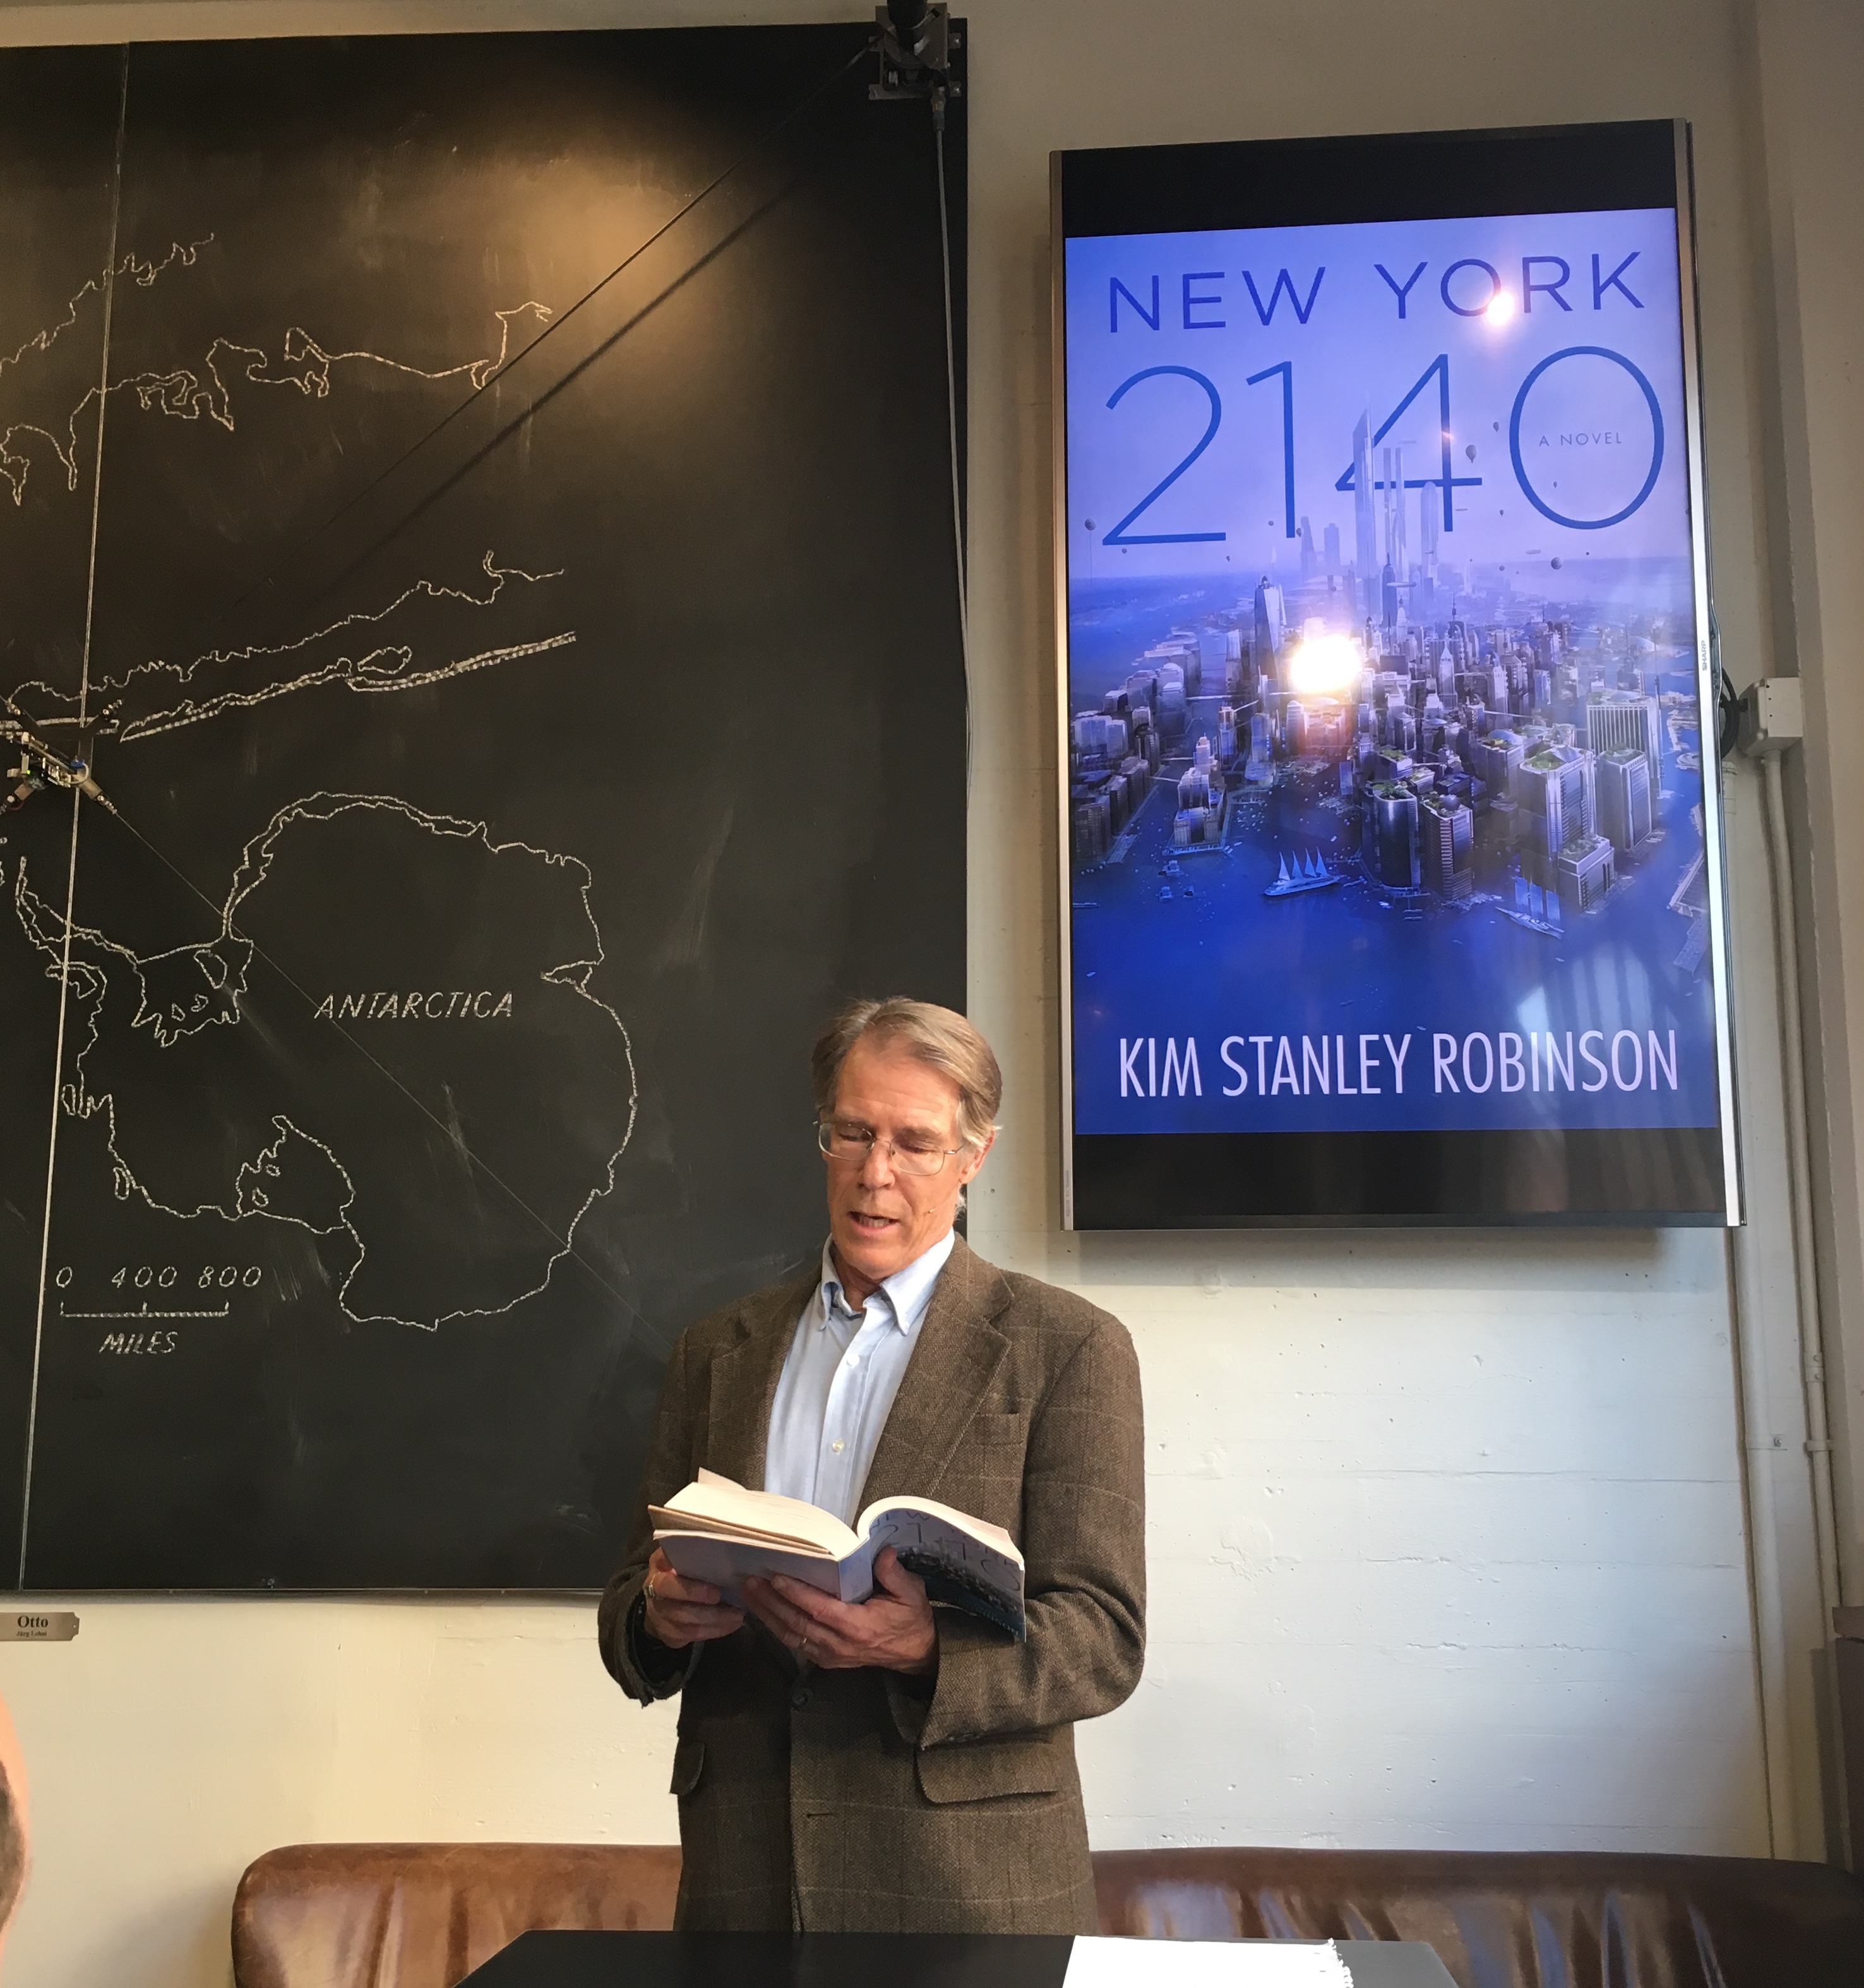 Kim Stanley Robinson, reading from his novel *New York 2140* at The Interval, May 9 2017.